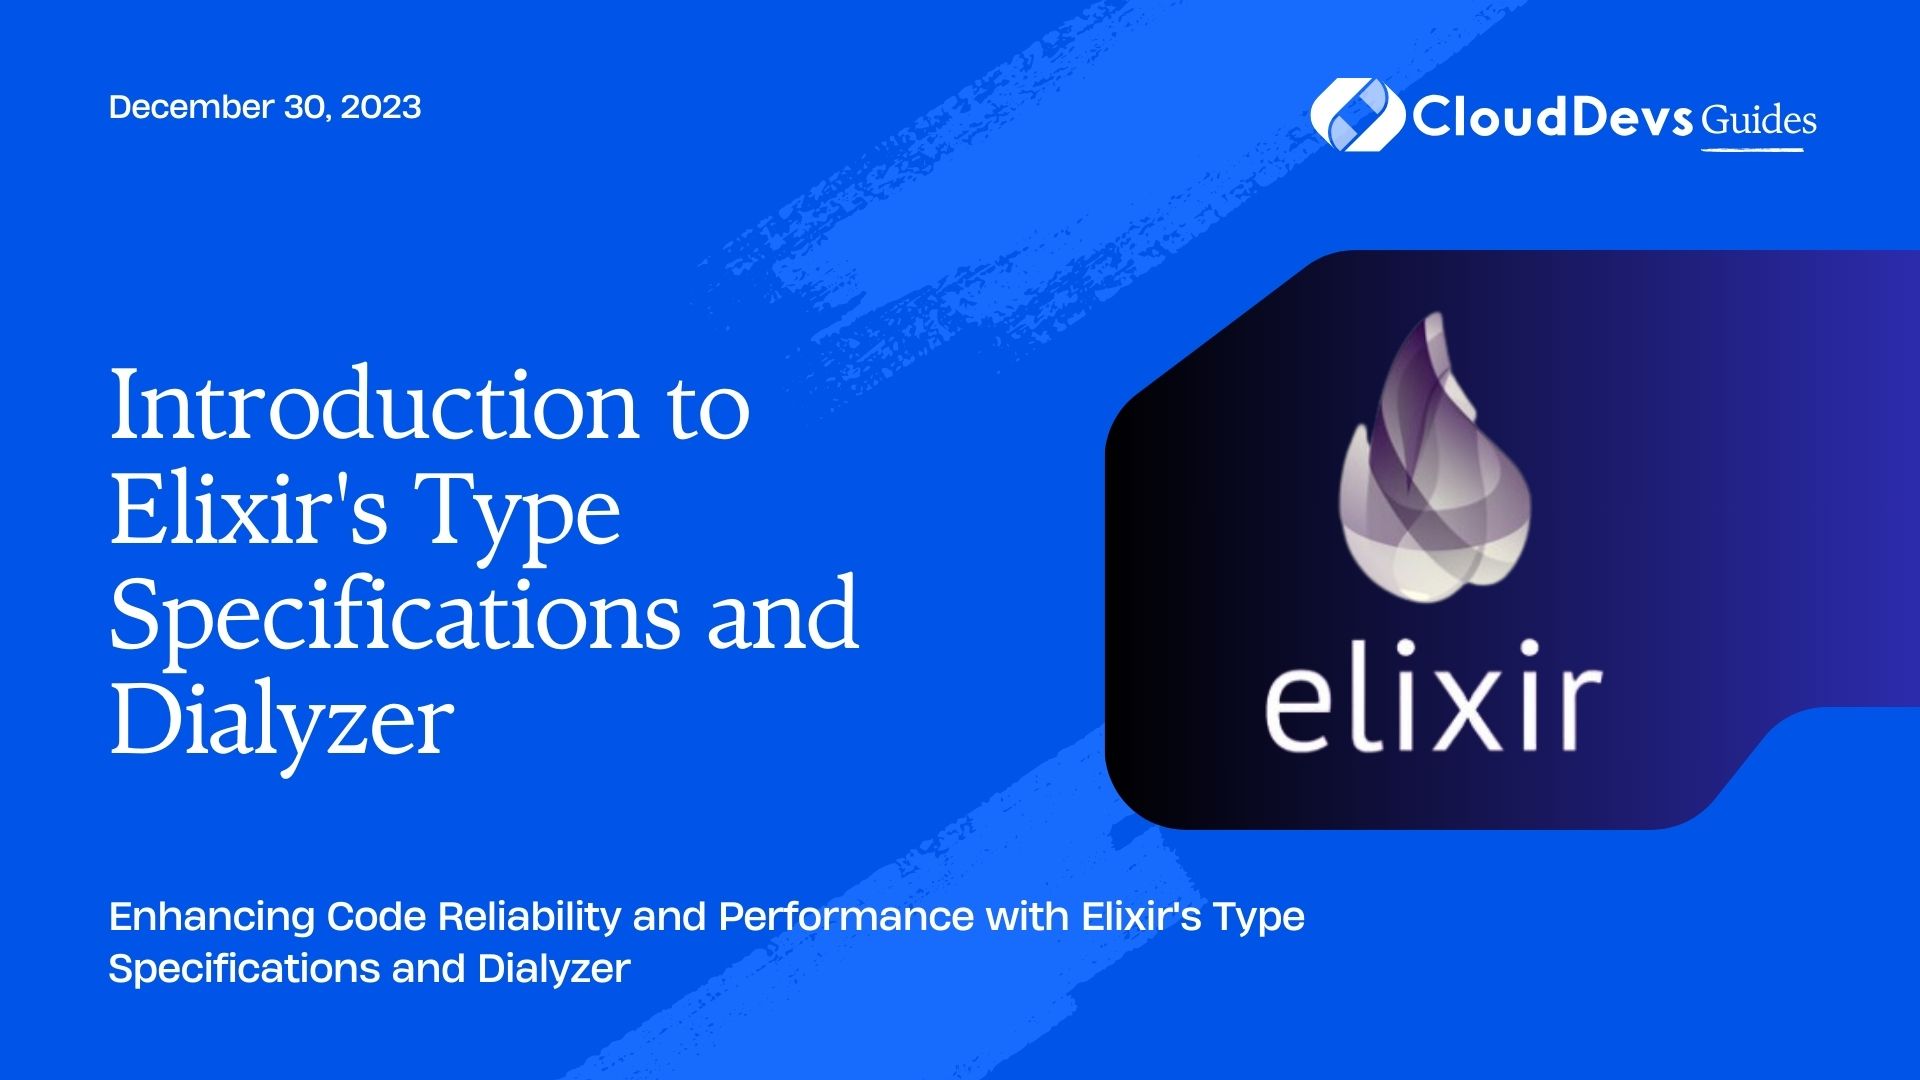 Introduction to Elixir's Type Specifications and Dialyzer